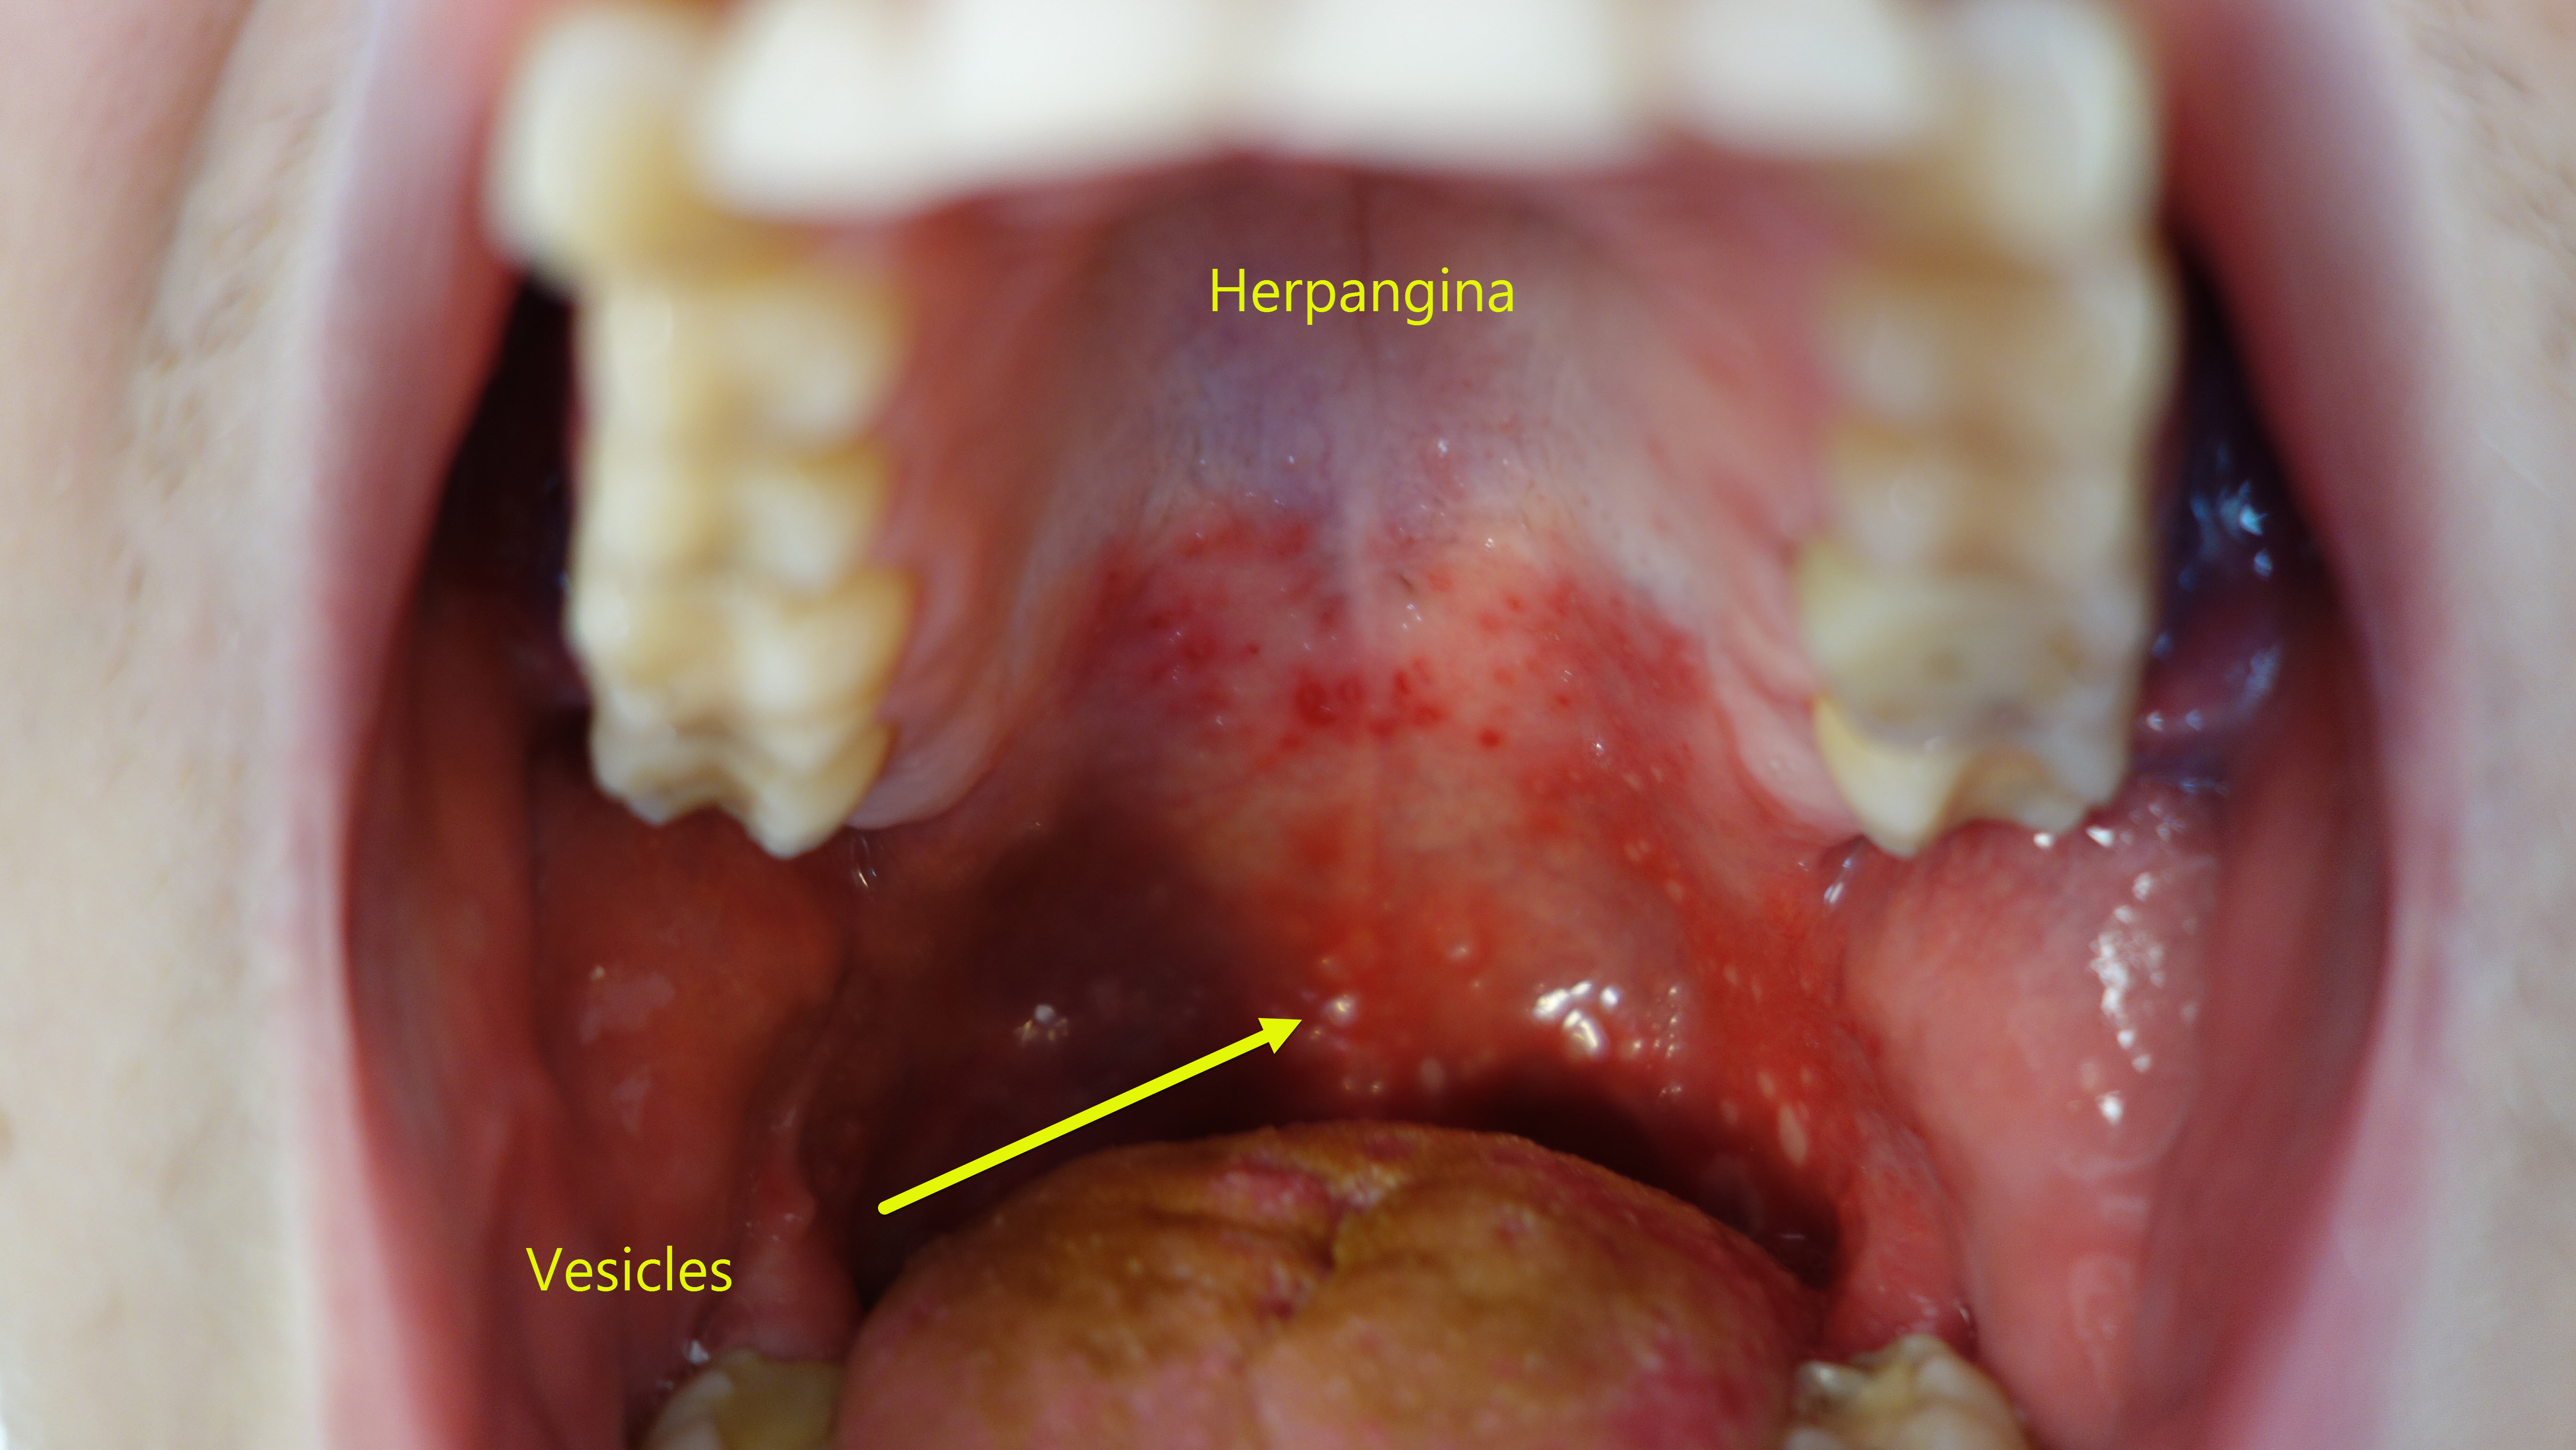 Erythema, vesicles and ulcerating lesions in herpangina